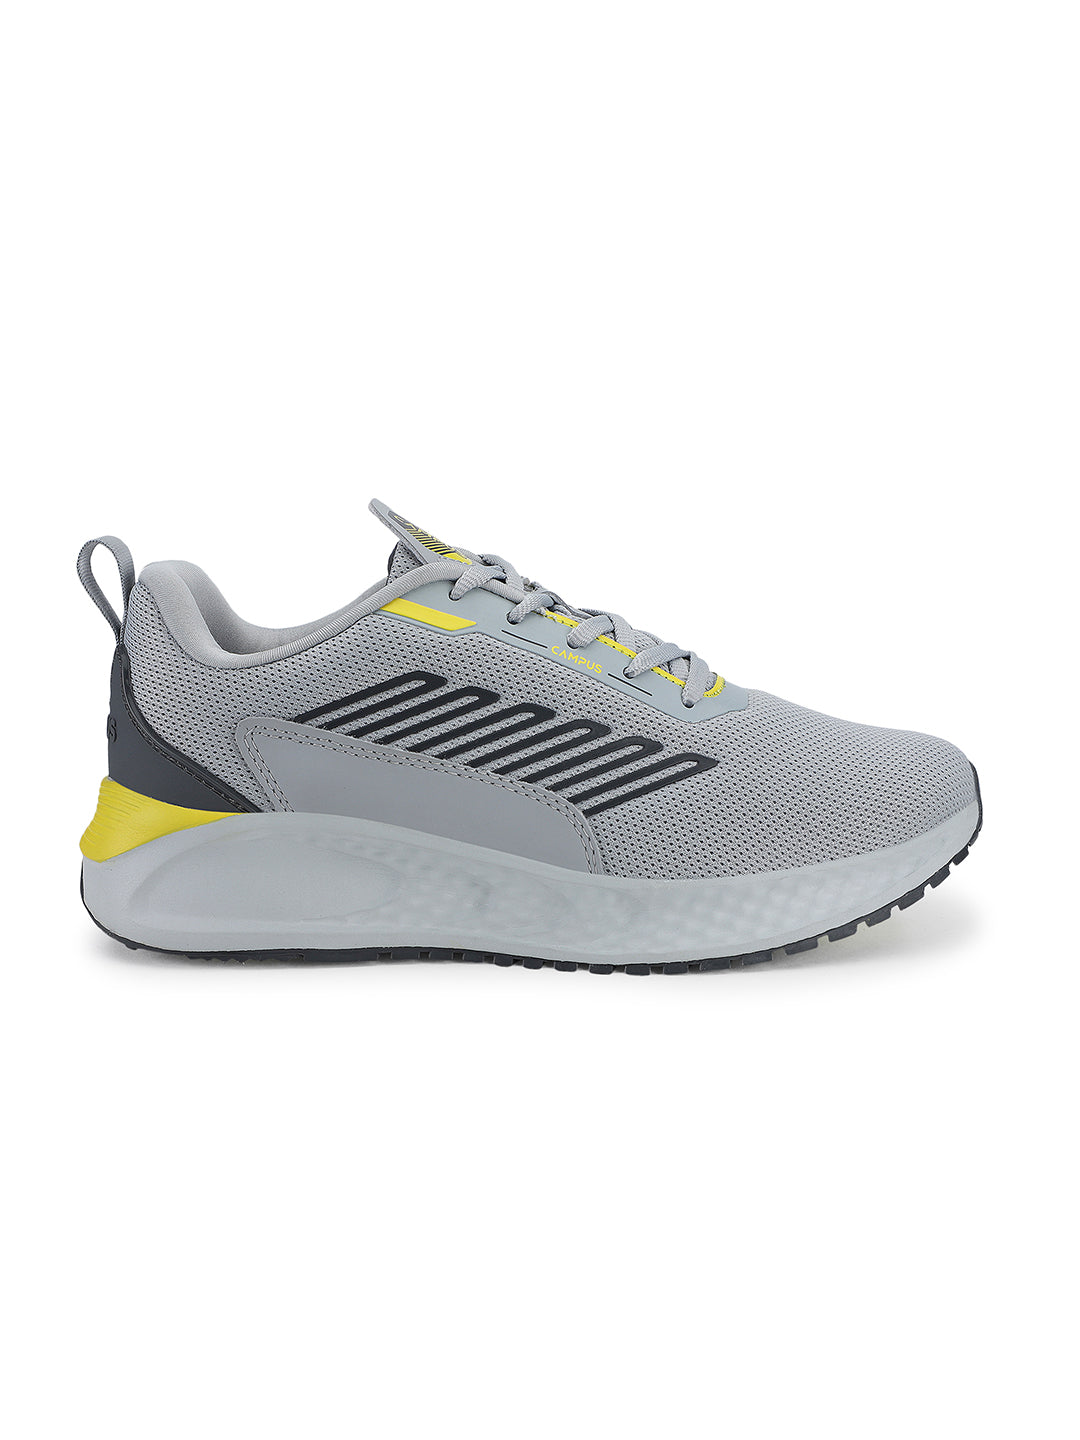 Puma Roma Skyline Flagship Lace Up Mens Grey Sneakers Casual Shoes 37243302  | eBay